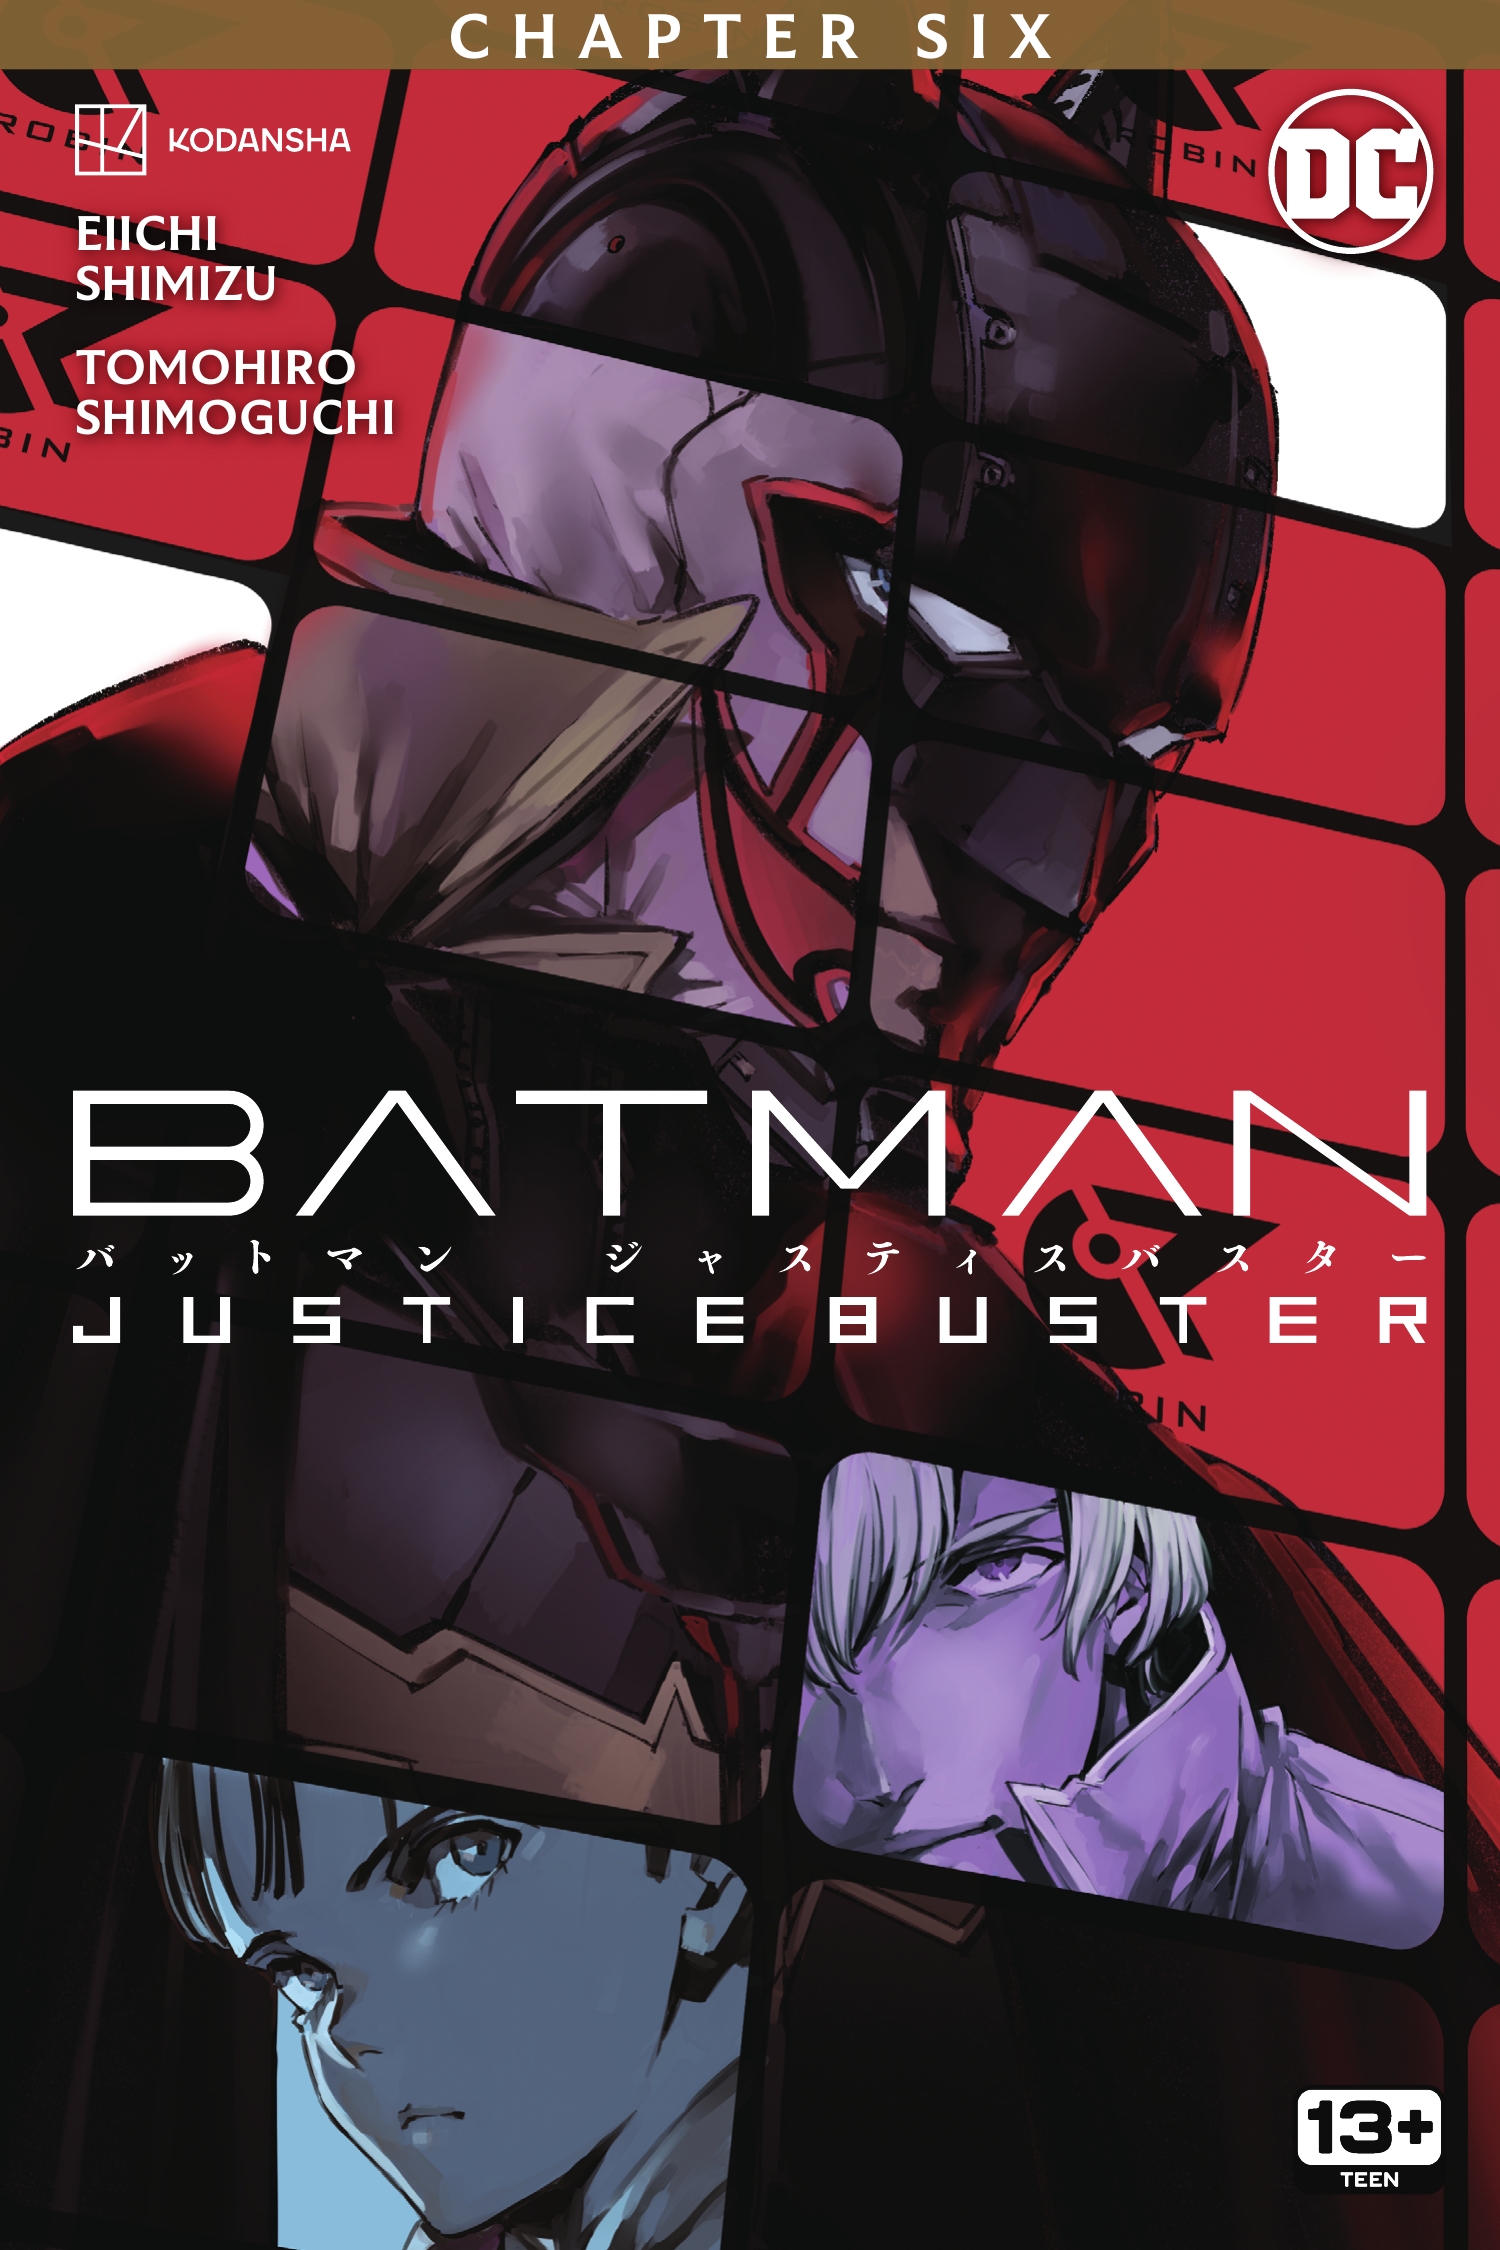 Read online Batman: Justice Buster comic -  Issue #6 - 1